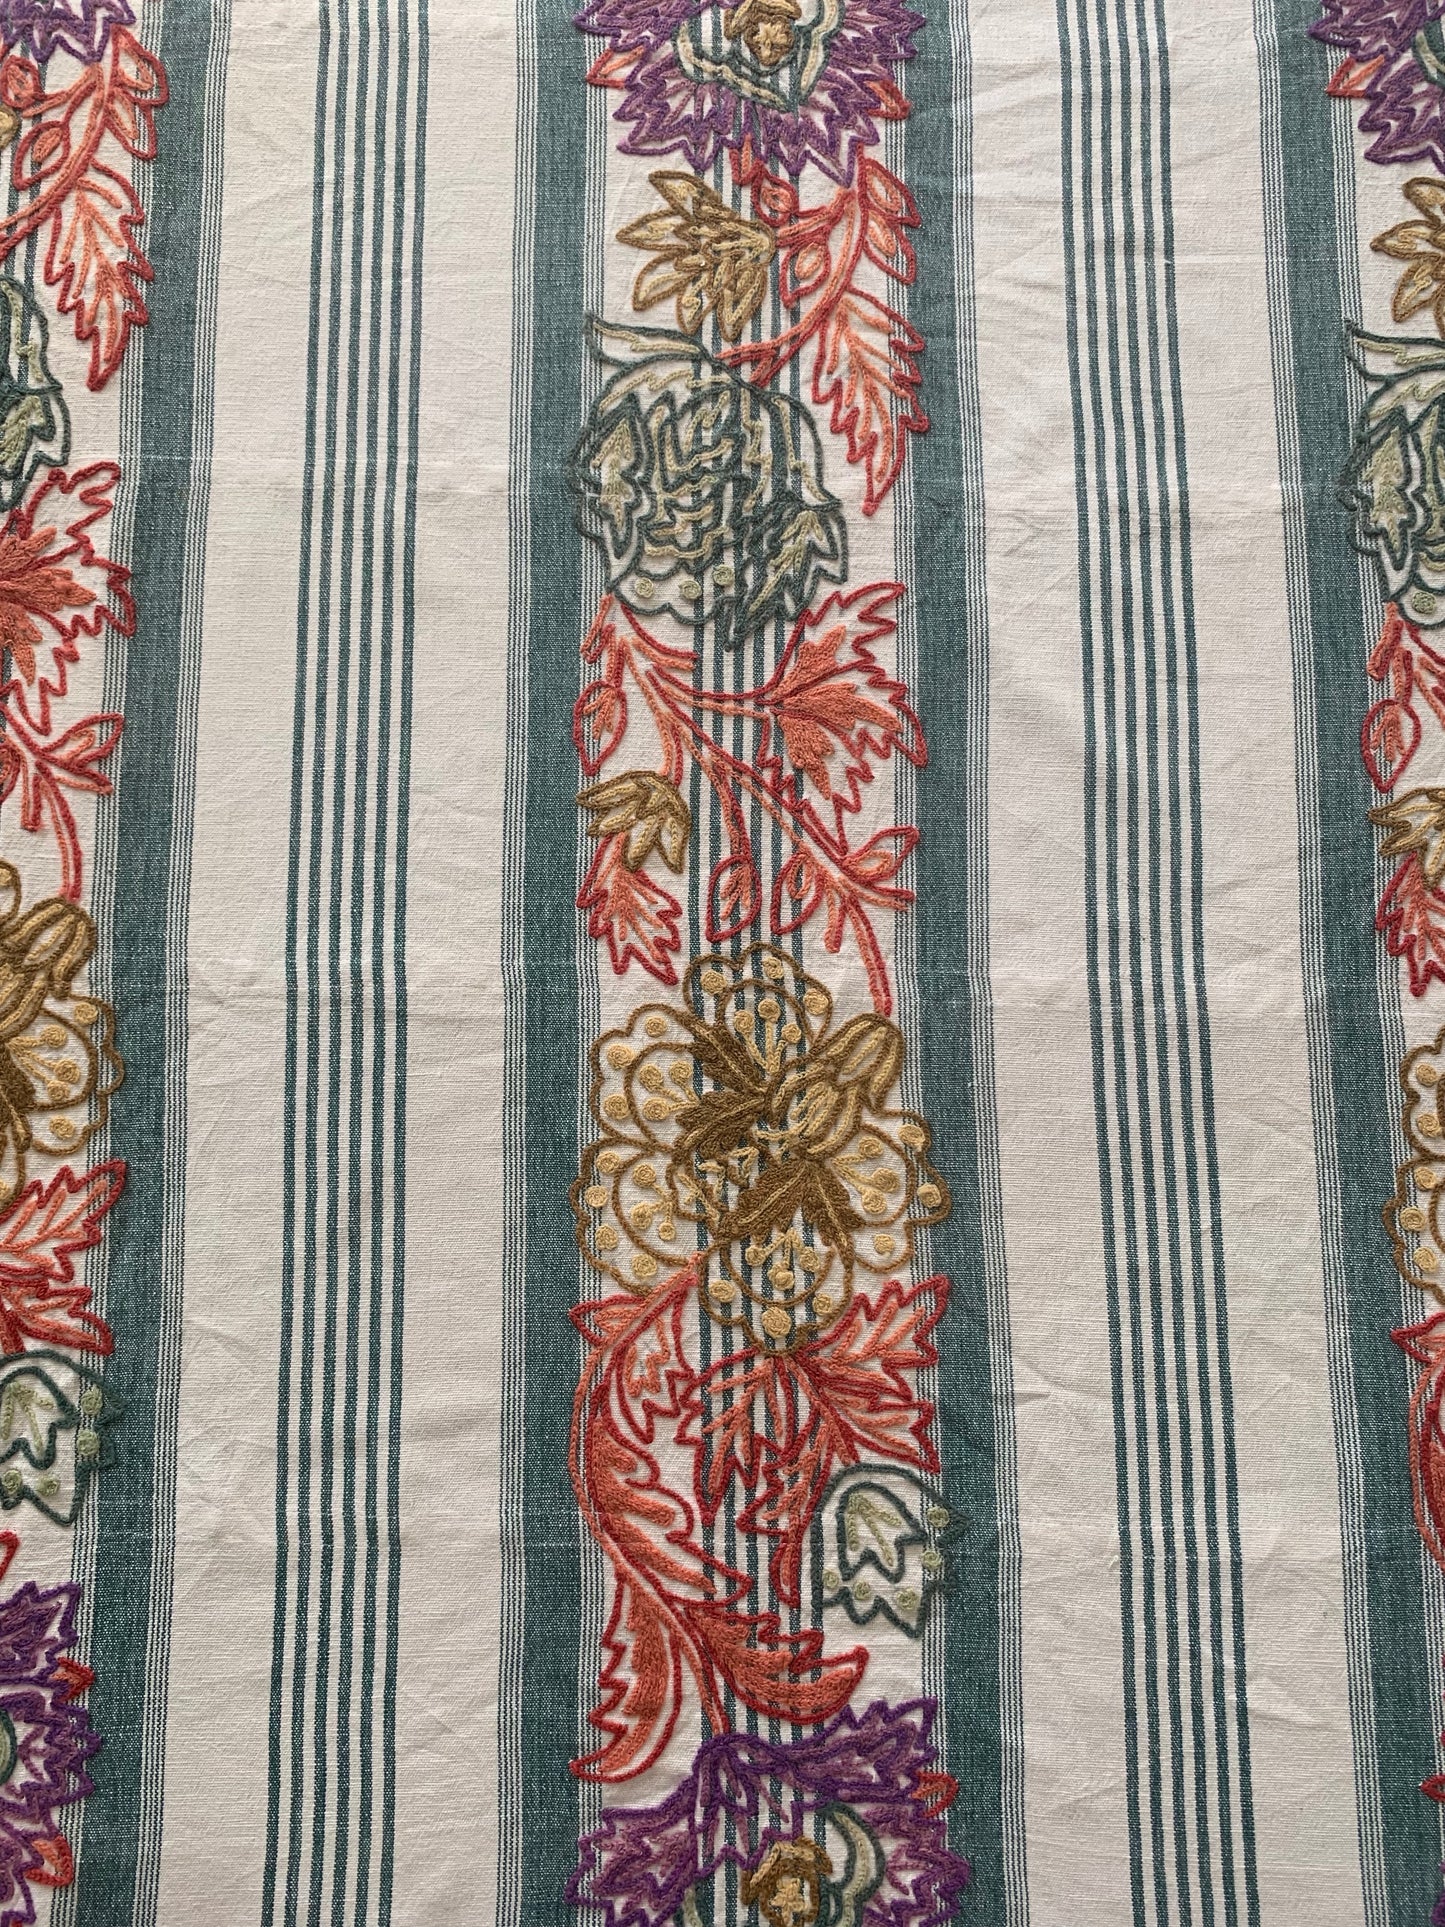 Striped Crewelwork Tablecloth